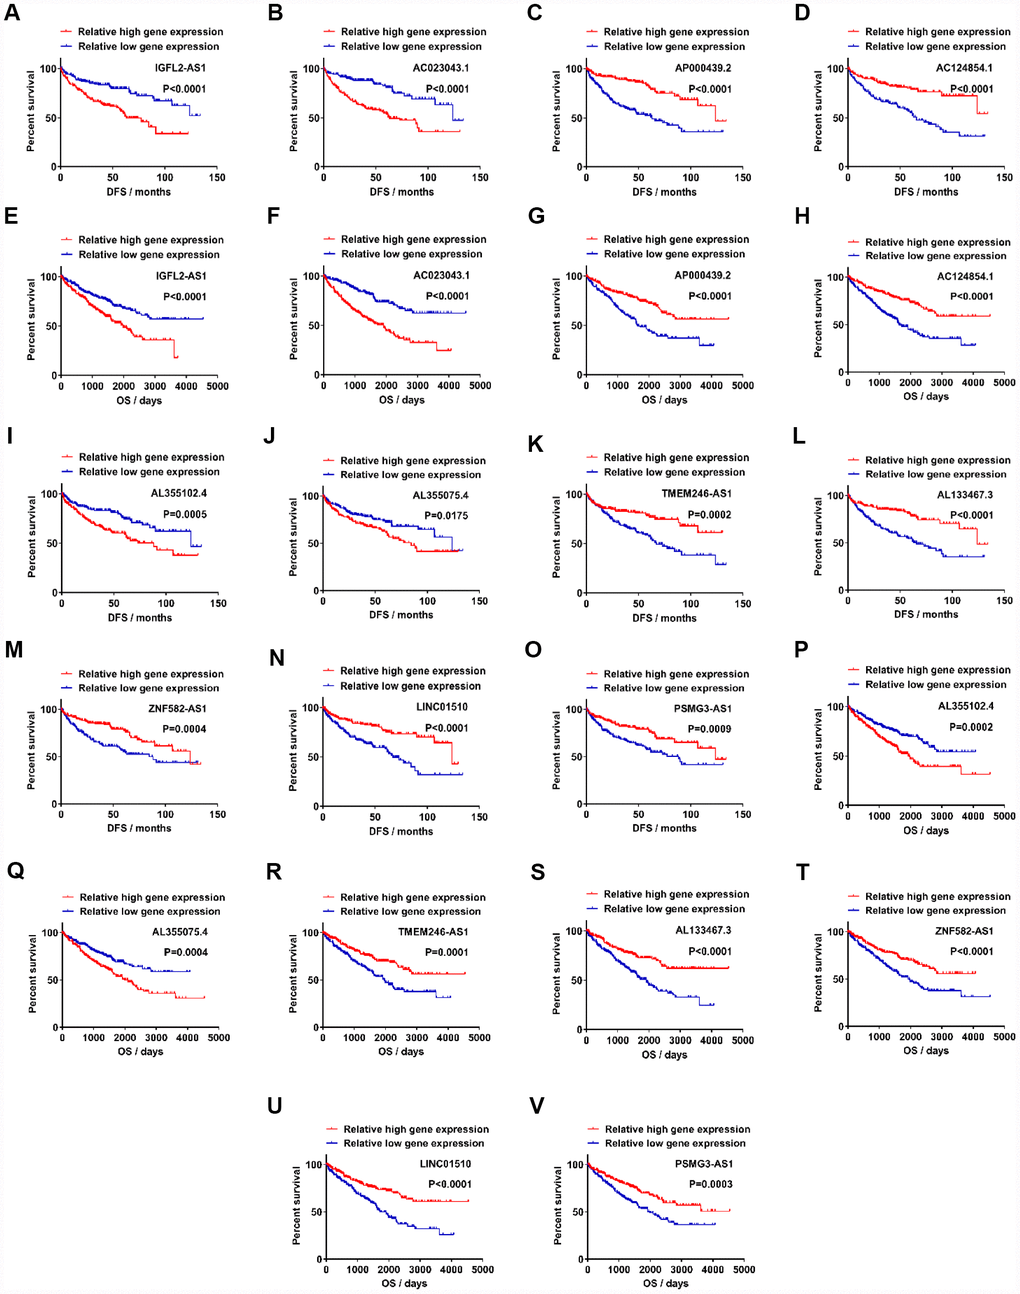 Candidate lncRNAs acts as potentially prognostic biomarkers for clear cell renal cell carcinoma. (A–D) Upregulated lncRNAs exhibited statistically significant difference between relative high gene expression and low expression in DFS. (E–H) Upregulated lncRNAs exhibited statistical difference in OS. (I–O) Downregulated lncRNAs exhibited statistical difference in DFS. (P–V) Downregulated lncRNAs exhibited statistical difference in OS. lncRNAs, long non-coding RNAs.